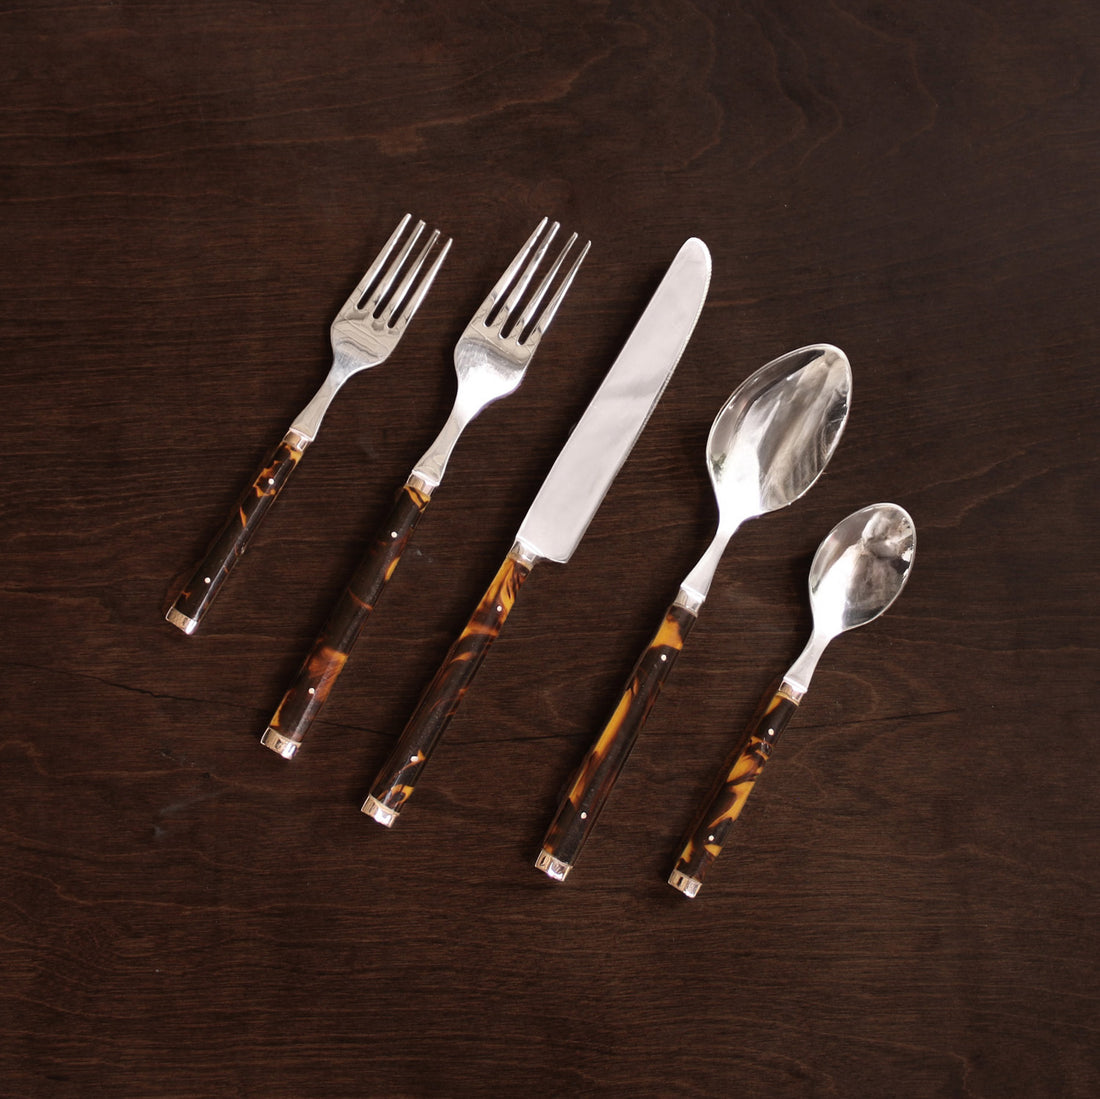 VIDA Tortoise and Gold Stainless Flatware Set of 5 (Gold)